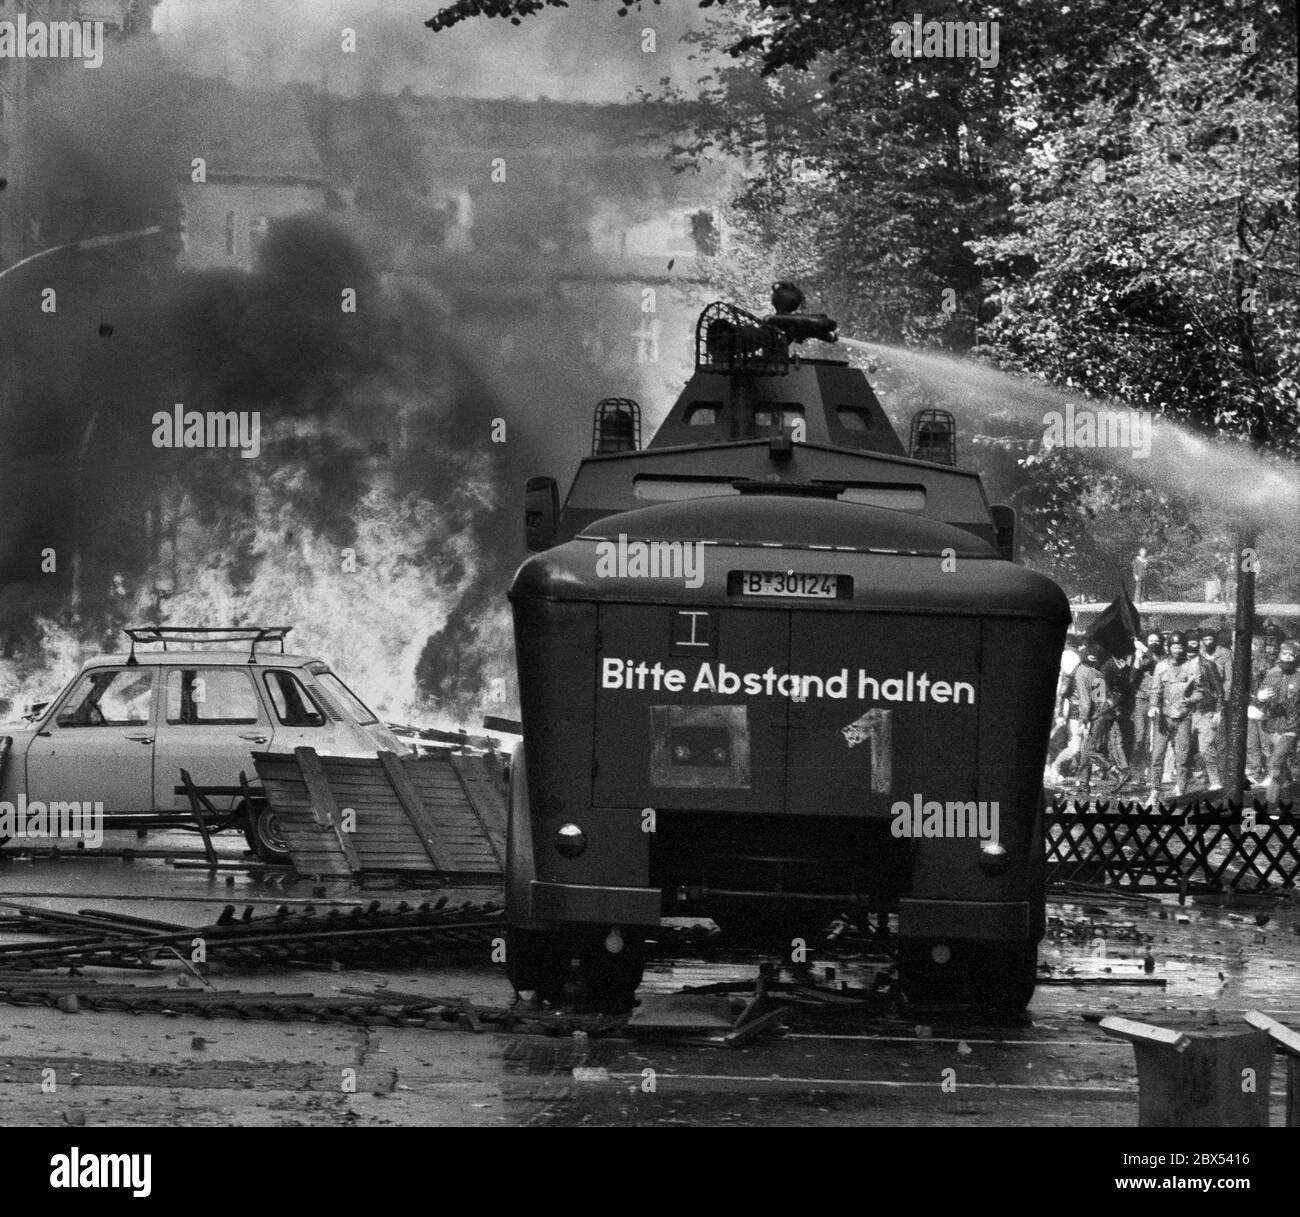 Berlin-Schoeneberg / Left Party / 13.9.1981. The American Secretary of Defense Haig comes to Berlin, left-wing group protests against American arms policy. Riots break out on Winterfeldtplatz. Barricades on Goltzstrasse, water cannons // Youth / Demo / Riots / Demo / Violence / Political actions / Left / Allied Haig had said before: there are more important things than peace. Rockets are to be stationed in Germany. [automated translation] Stock Photo